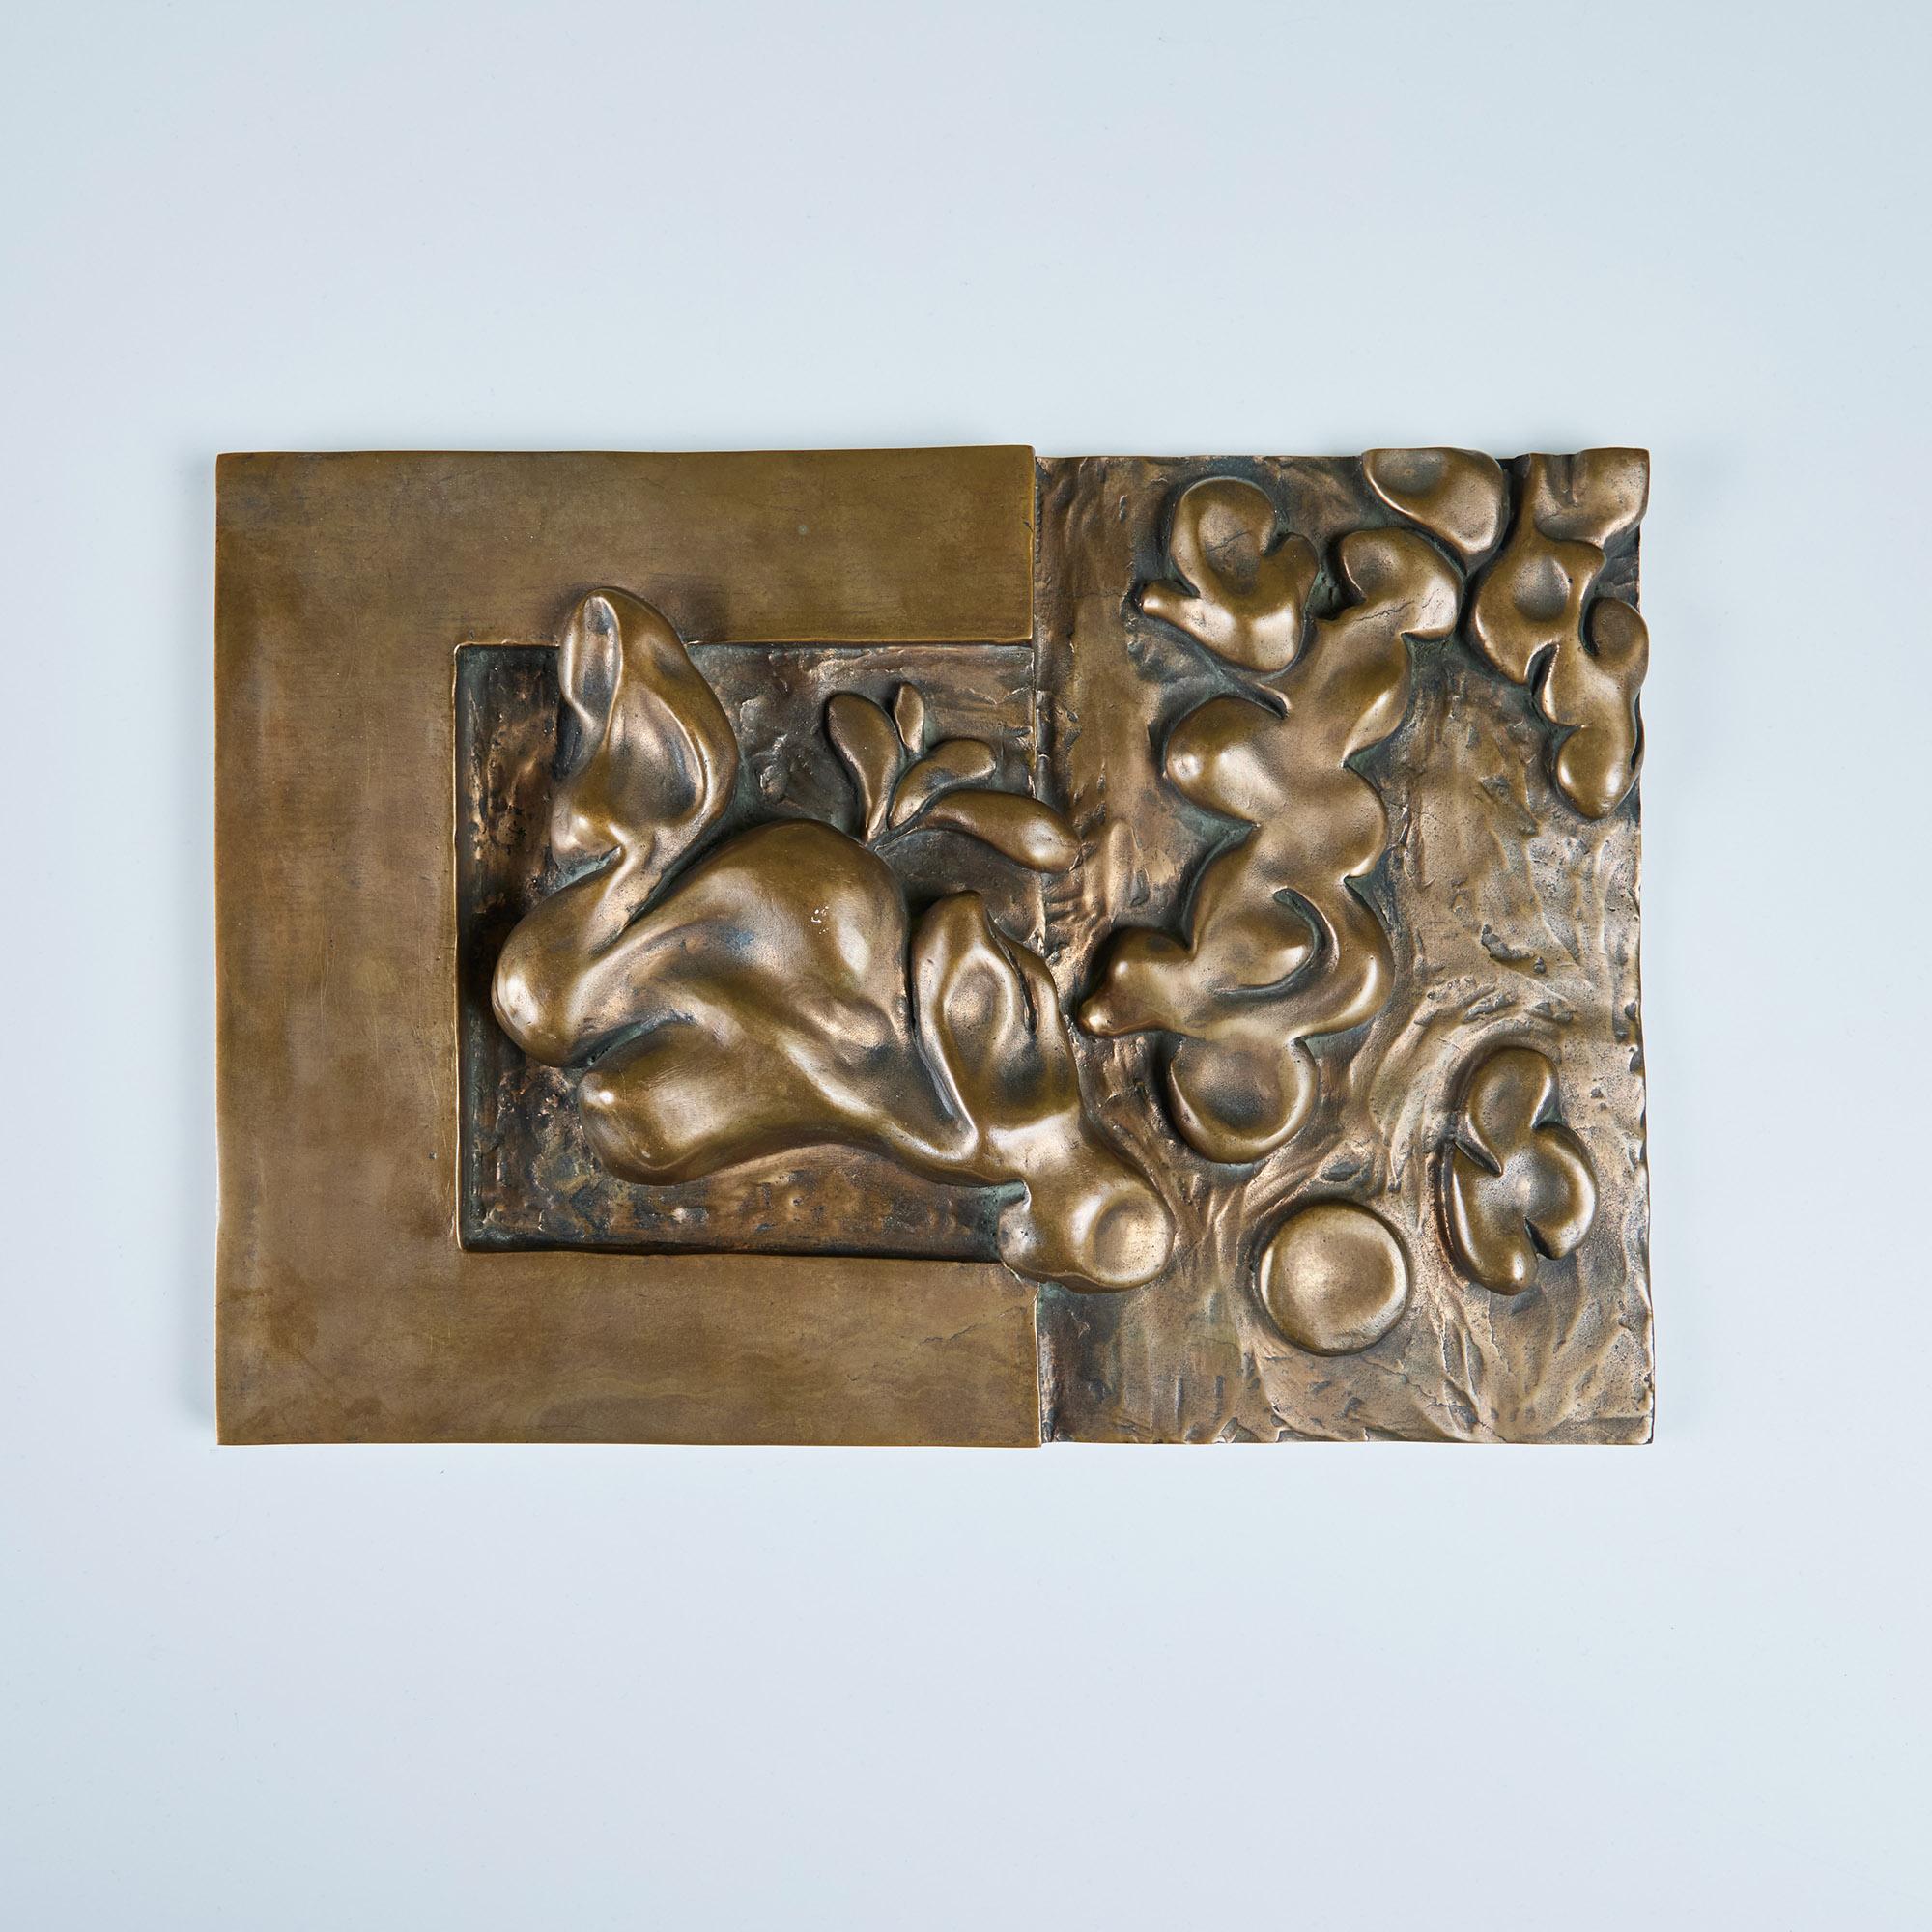 Abstract case bronze decorative plaque in the style of Edgar Britton. This weighty sculptural piece features three dimensional figures. A fun wall hanging or sculpture table piece.

Dimensions
13